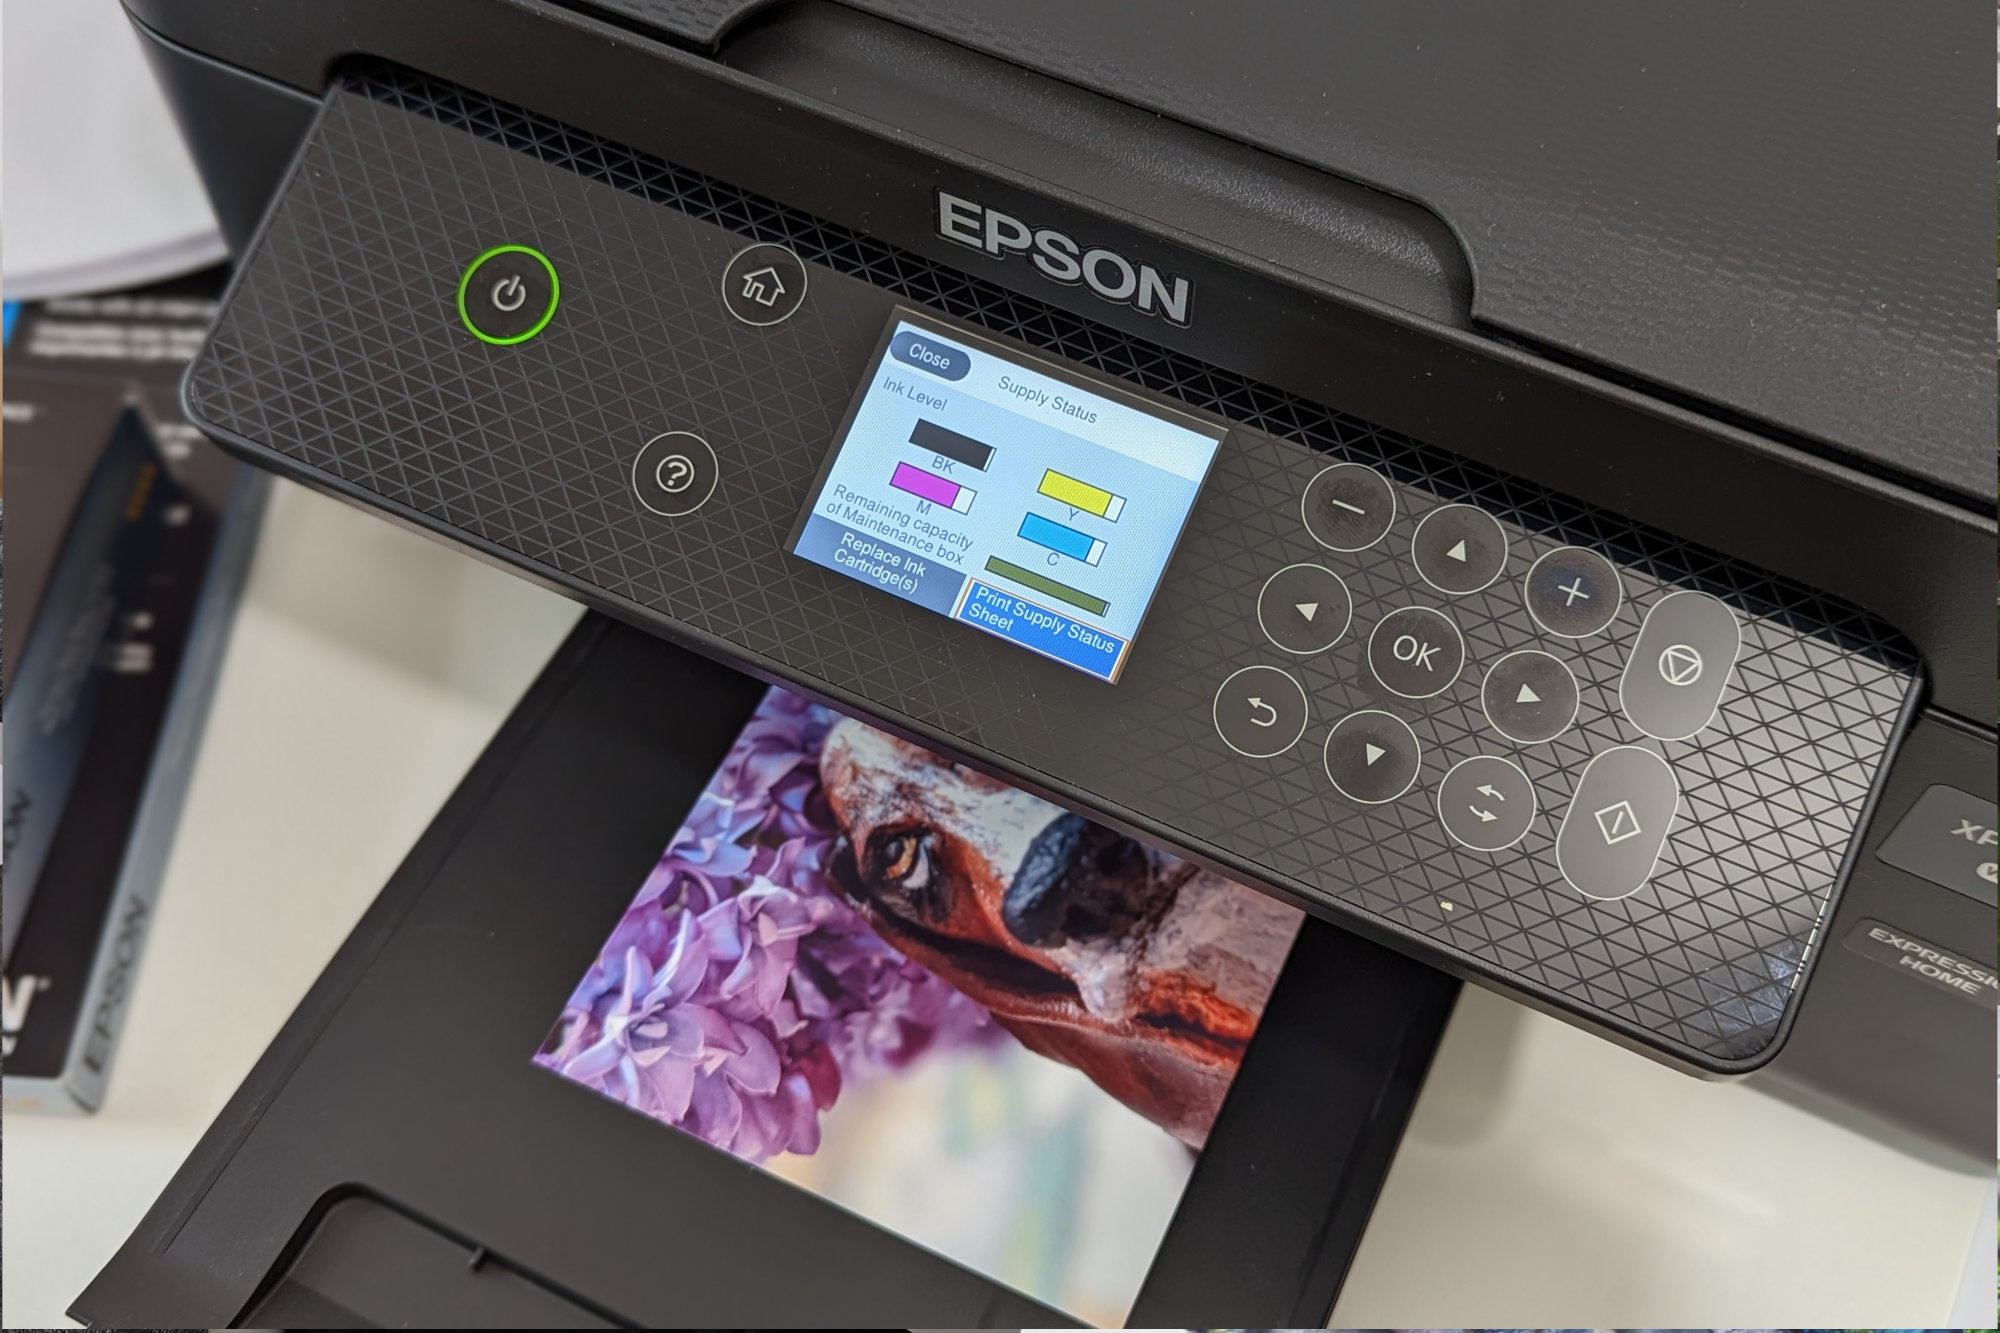 Epson Expression Home XP-4100 vs Epson Expression Home XP-4200